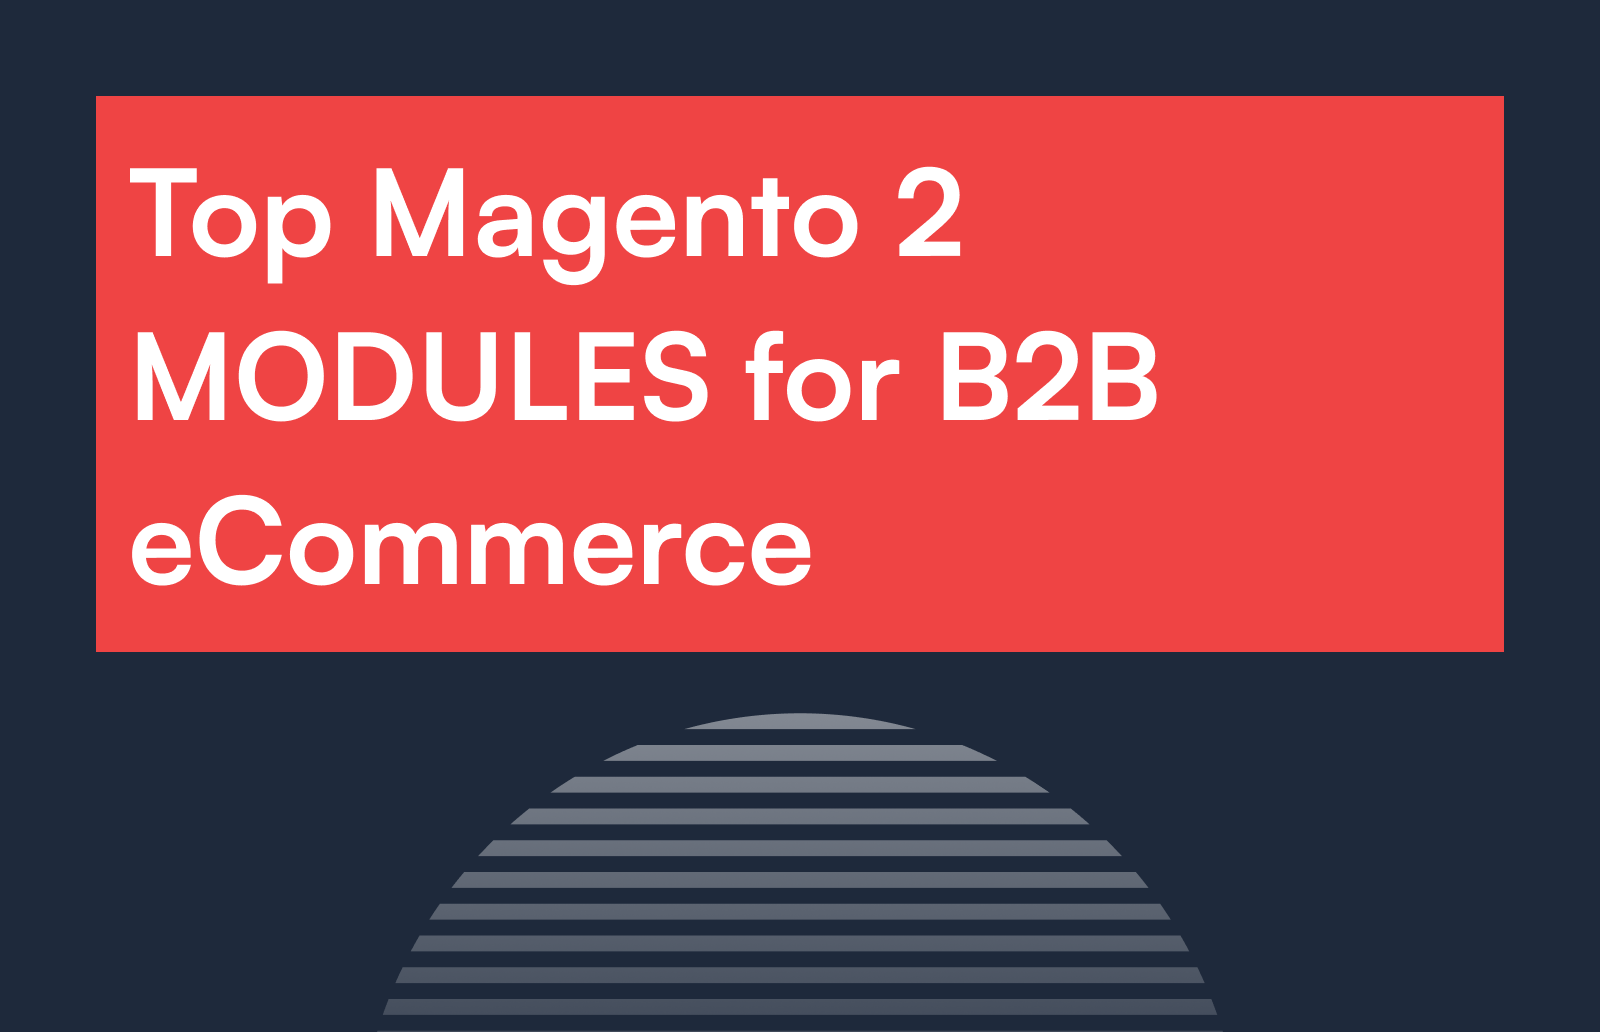 Top Magento 2 MODULES for B2B eCommerce